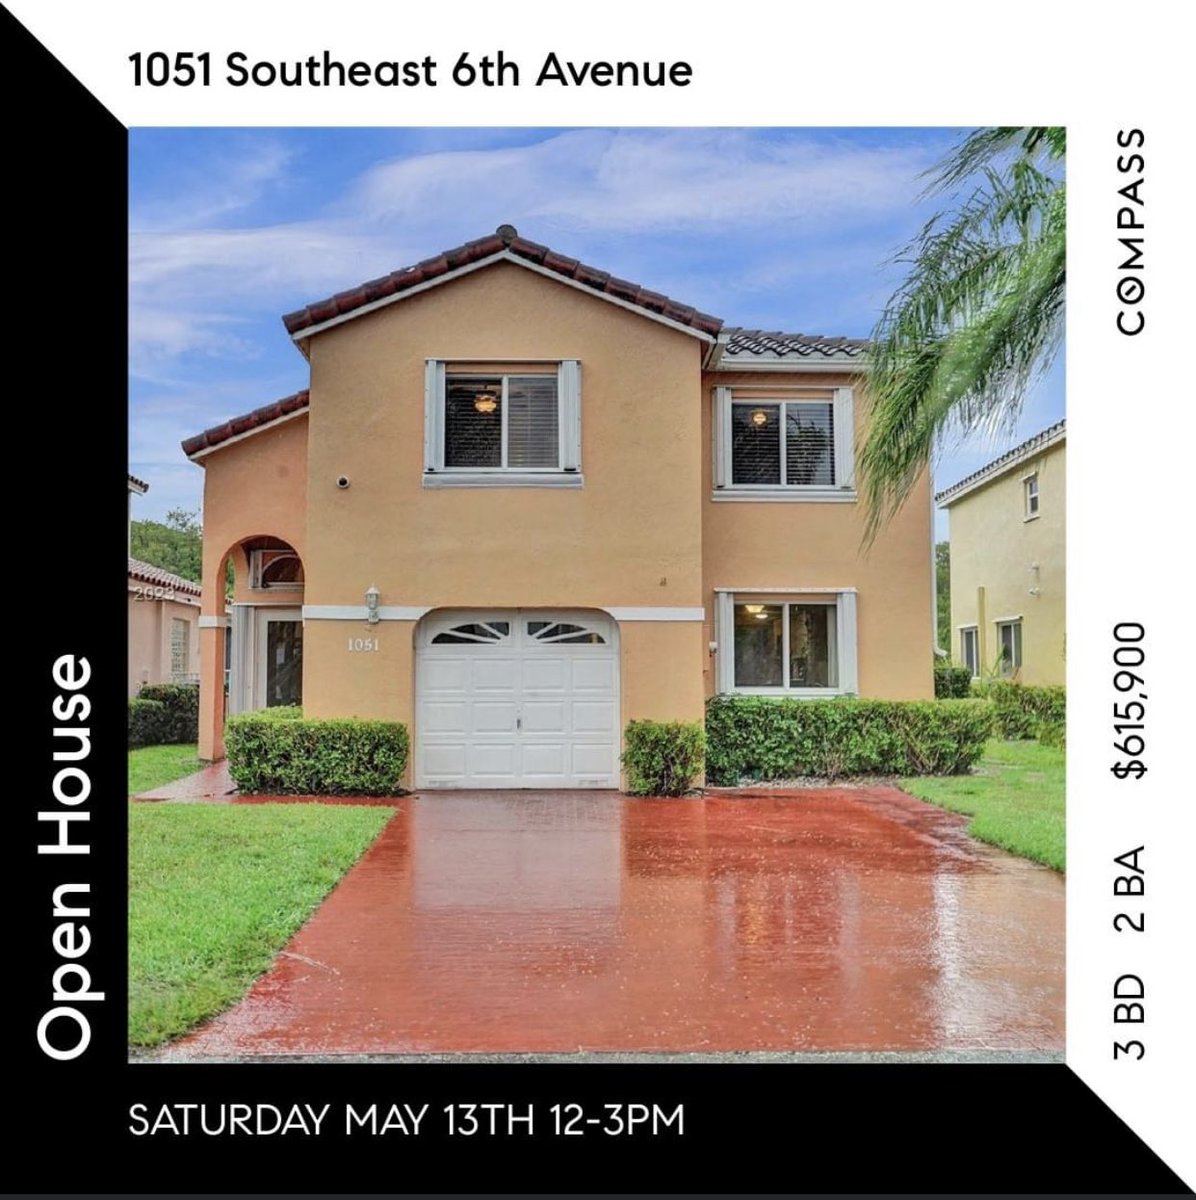 Join Us this Saturday May 13th 12-3pm.  Contact Kim Penton - Realtor Echea Group for more information +1 (954) 397-4662
#openhouse #workingwiththebest #compassagent #echeagroup #ftlauderdalerealestate #listingspecialist #justlistedhomes #kimpenton #sellingagent